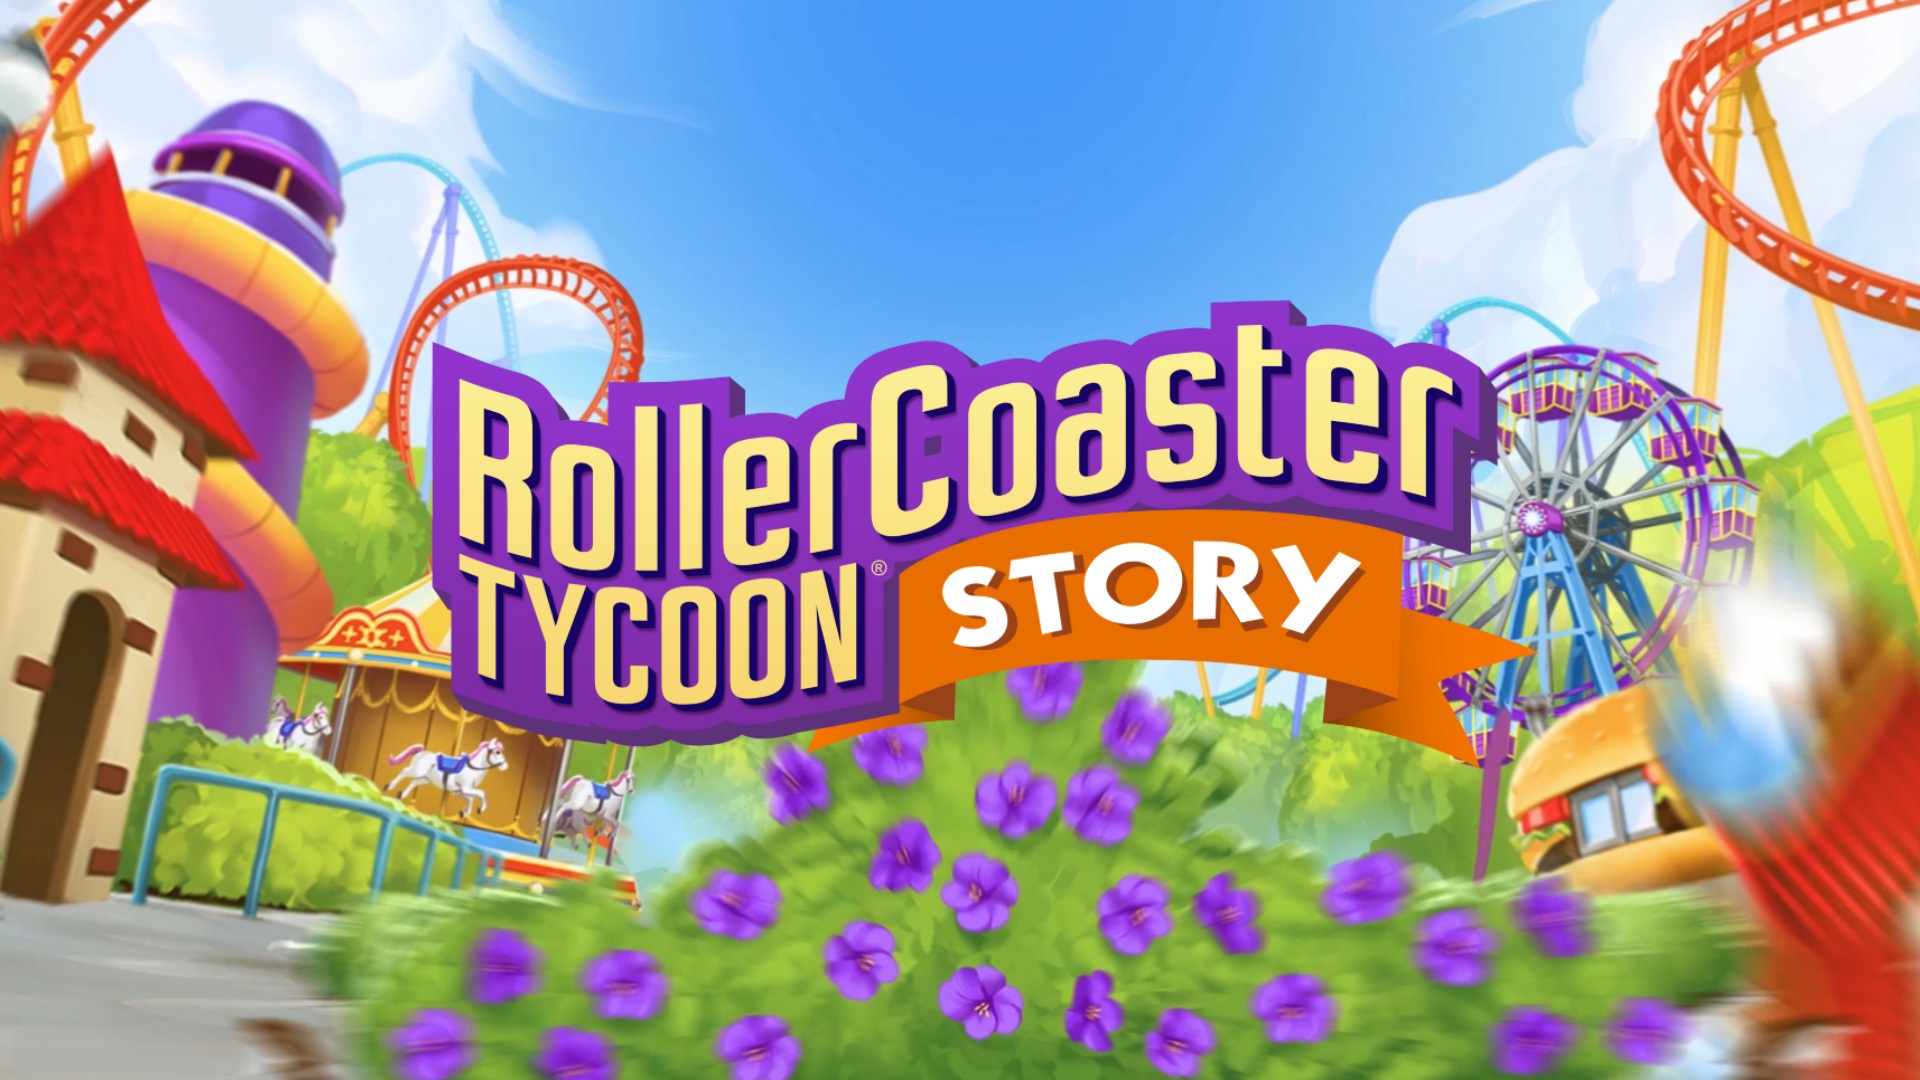 RollerCoaster Tycoon: Story